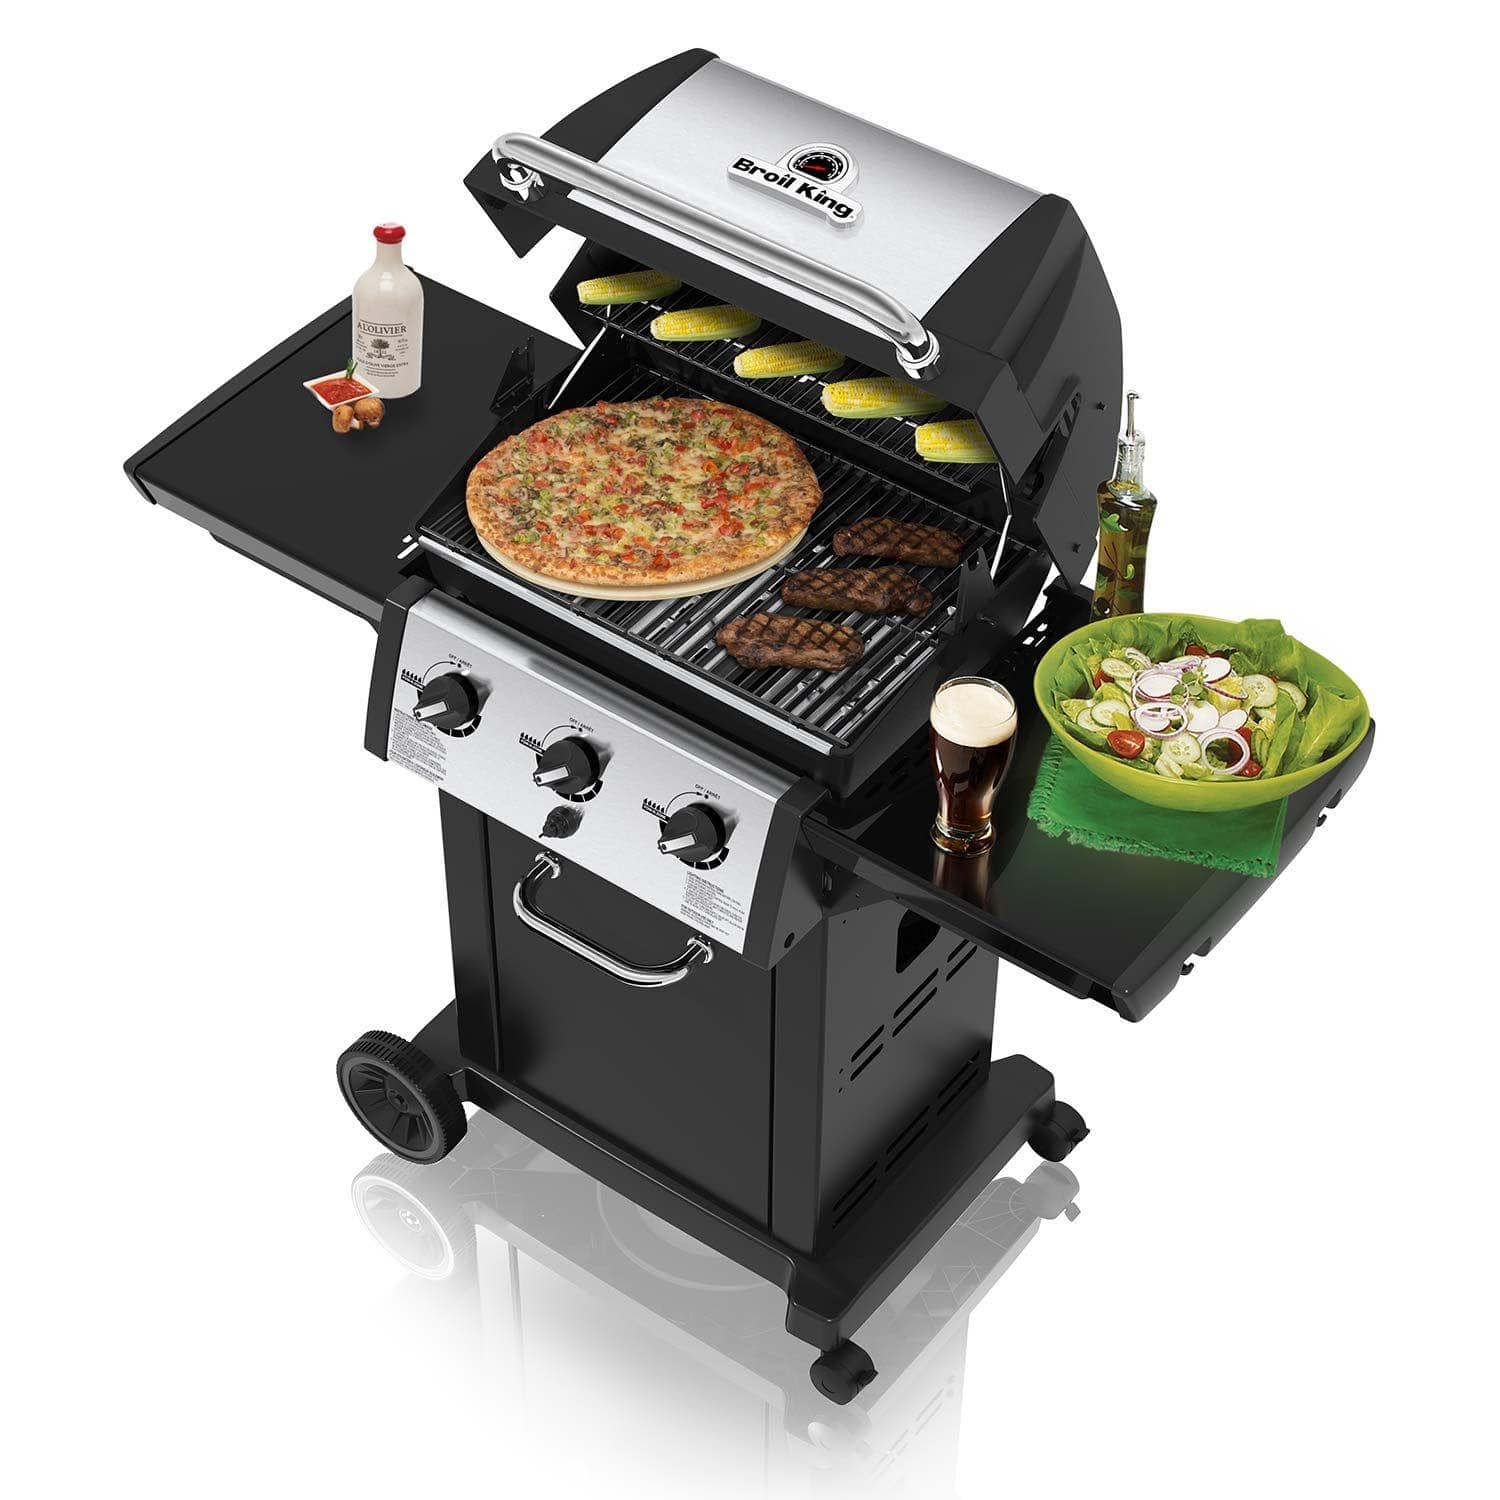 Broil King Freestanding Grill Broil King MON-320 Monarch 320 3-Burner Grill on 2-Wheel Cart, 22-Inches